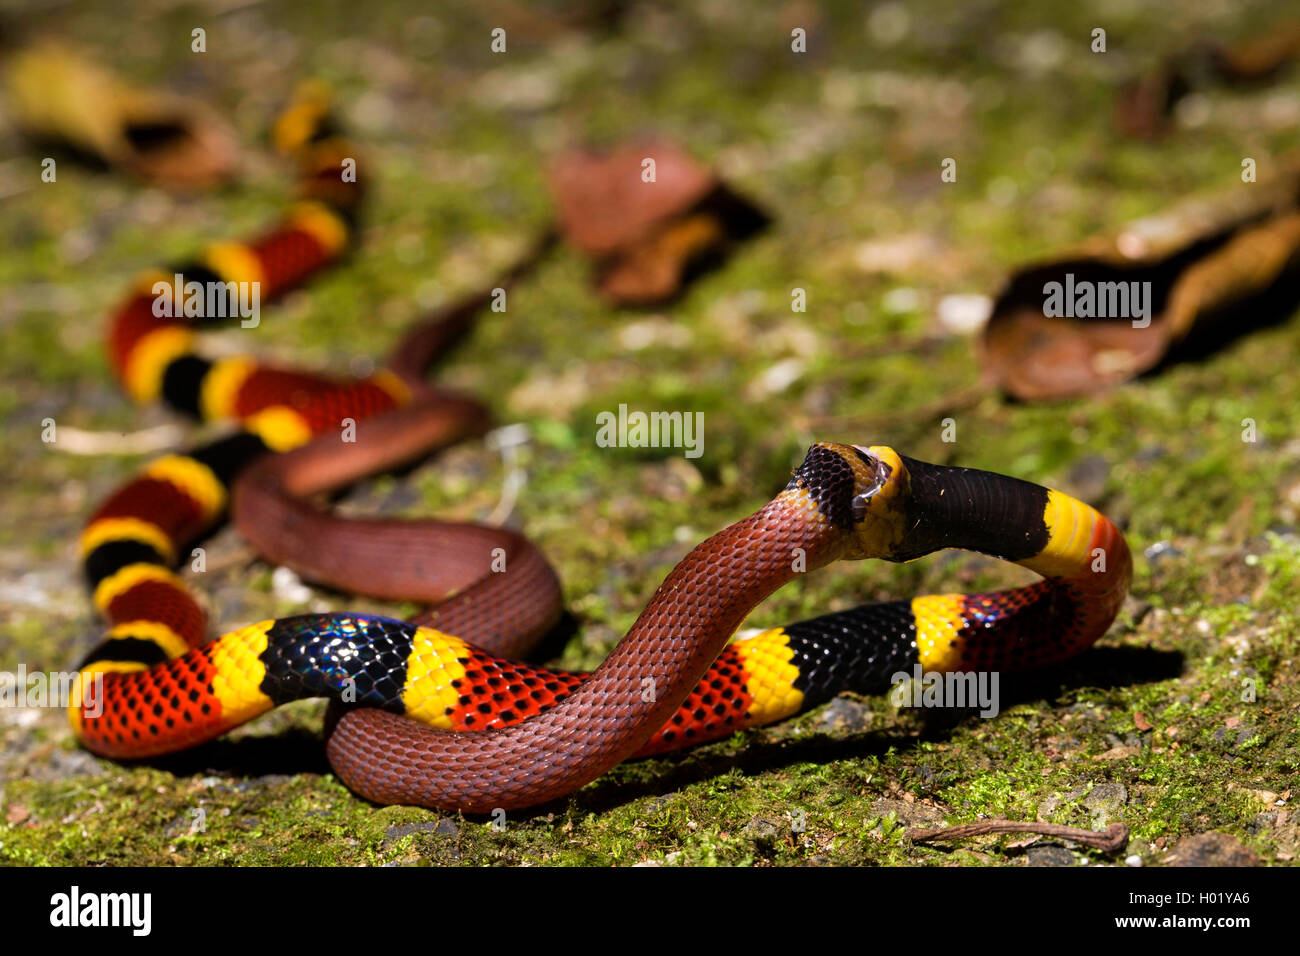 Costa Rican Coral Snake (Micrurus mosquitensis), feeds another snake, Costa Rica Stock Photo